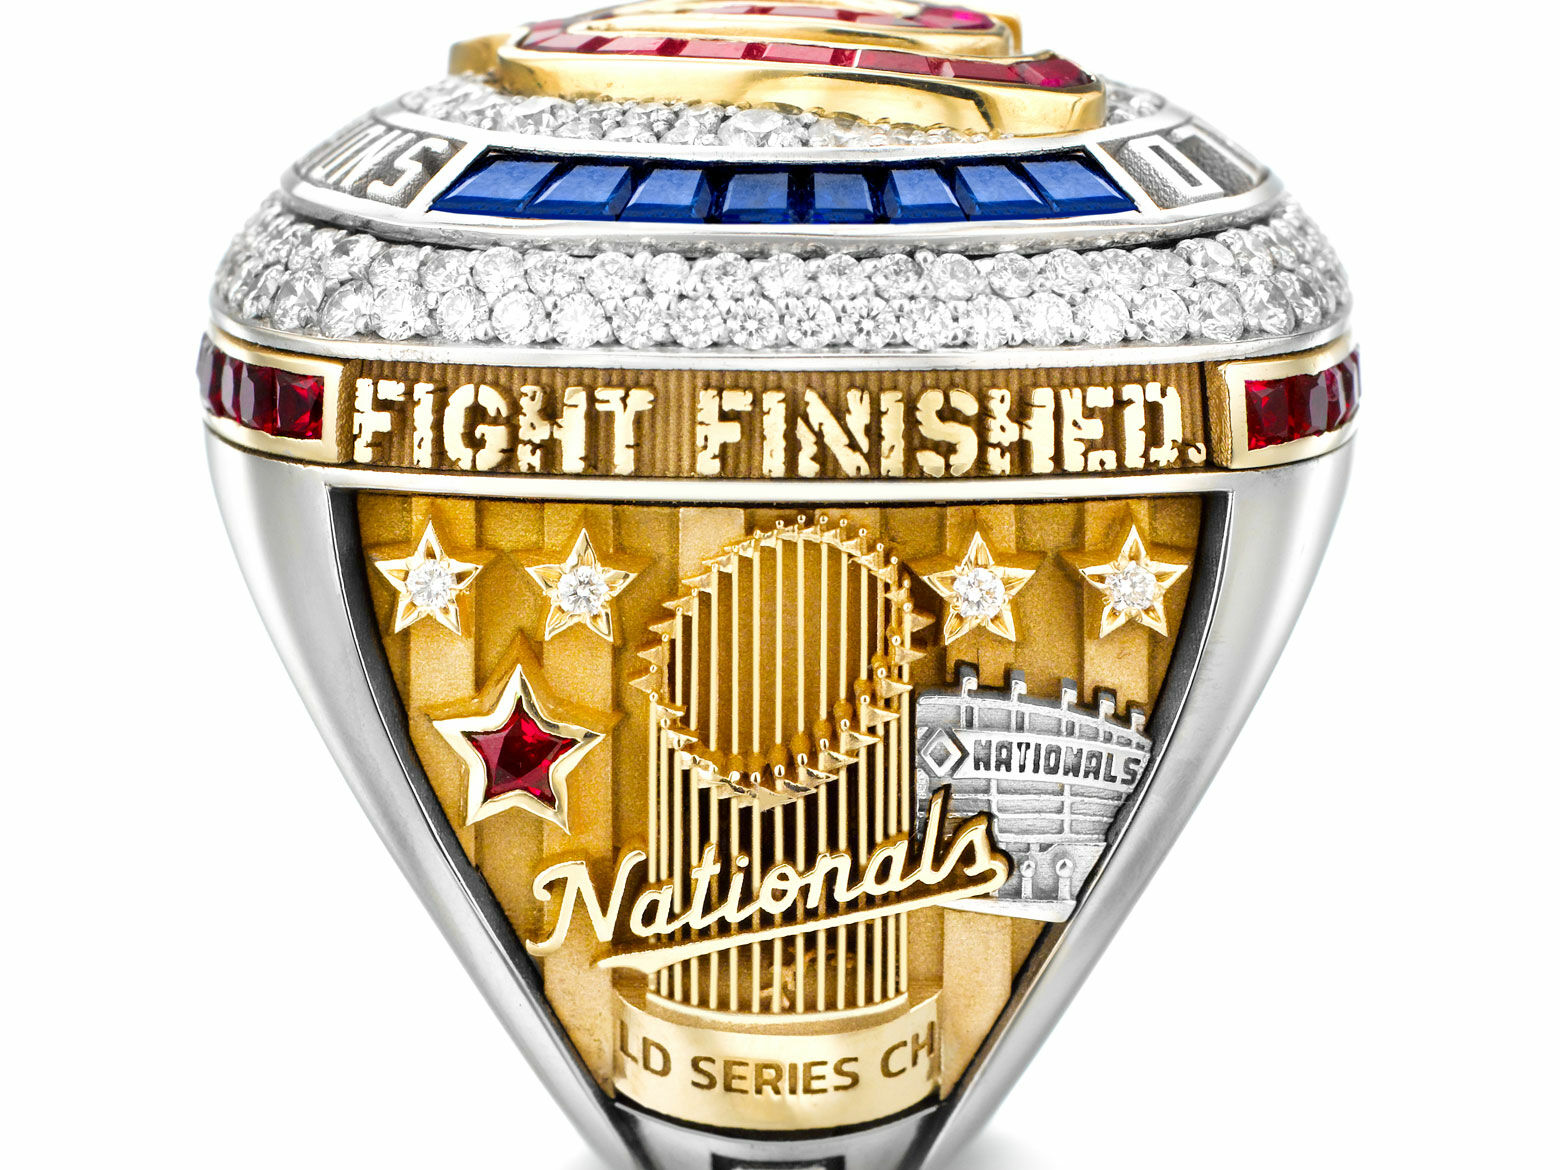 FIGHT FINISHED: The Official Washington Nationals World Series Championship  Season Commemorative Book